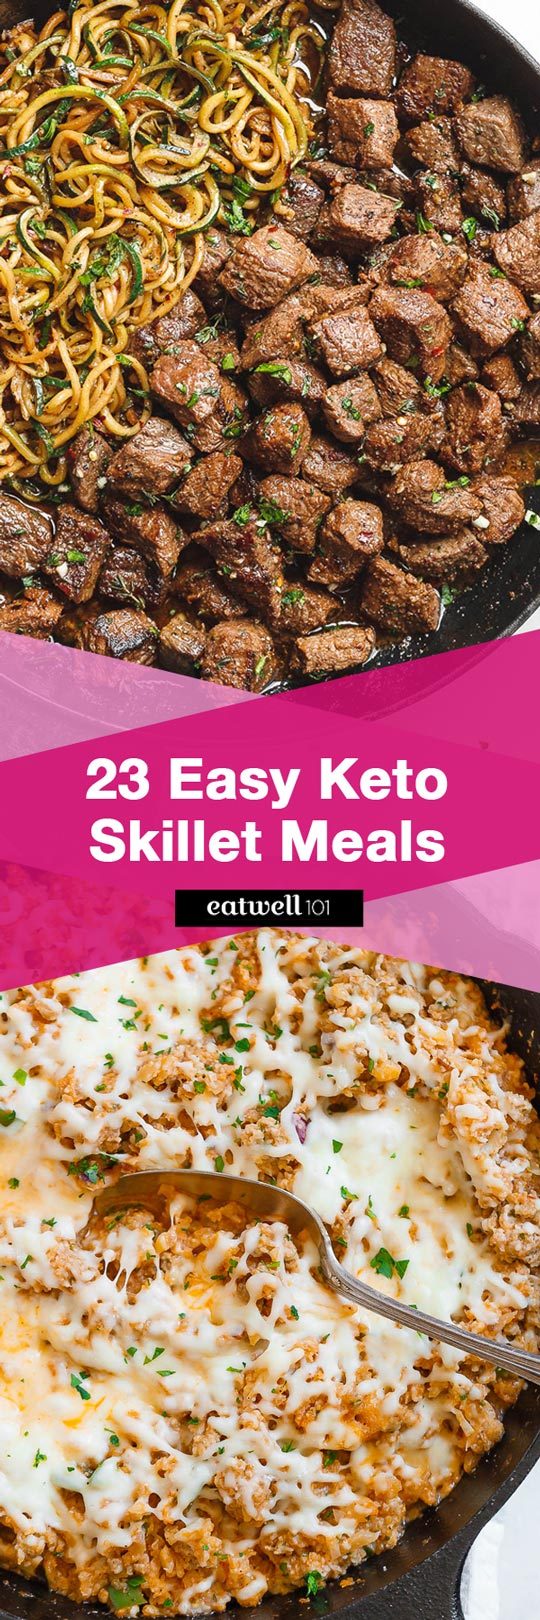 Keto Skillet Meal Recipes - Minimal clean-up and quick cook times make any of these keto one pan dinners a winner any night of the week.